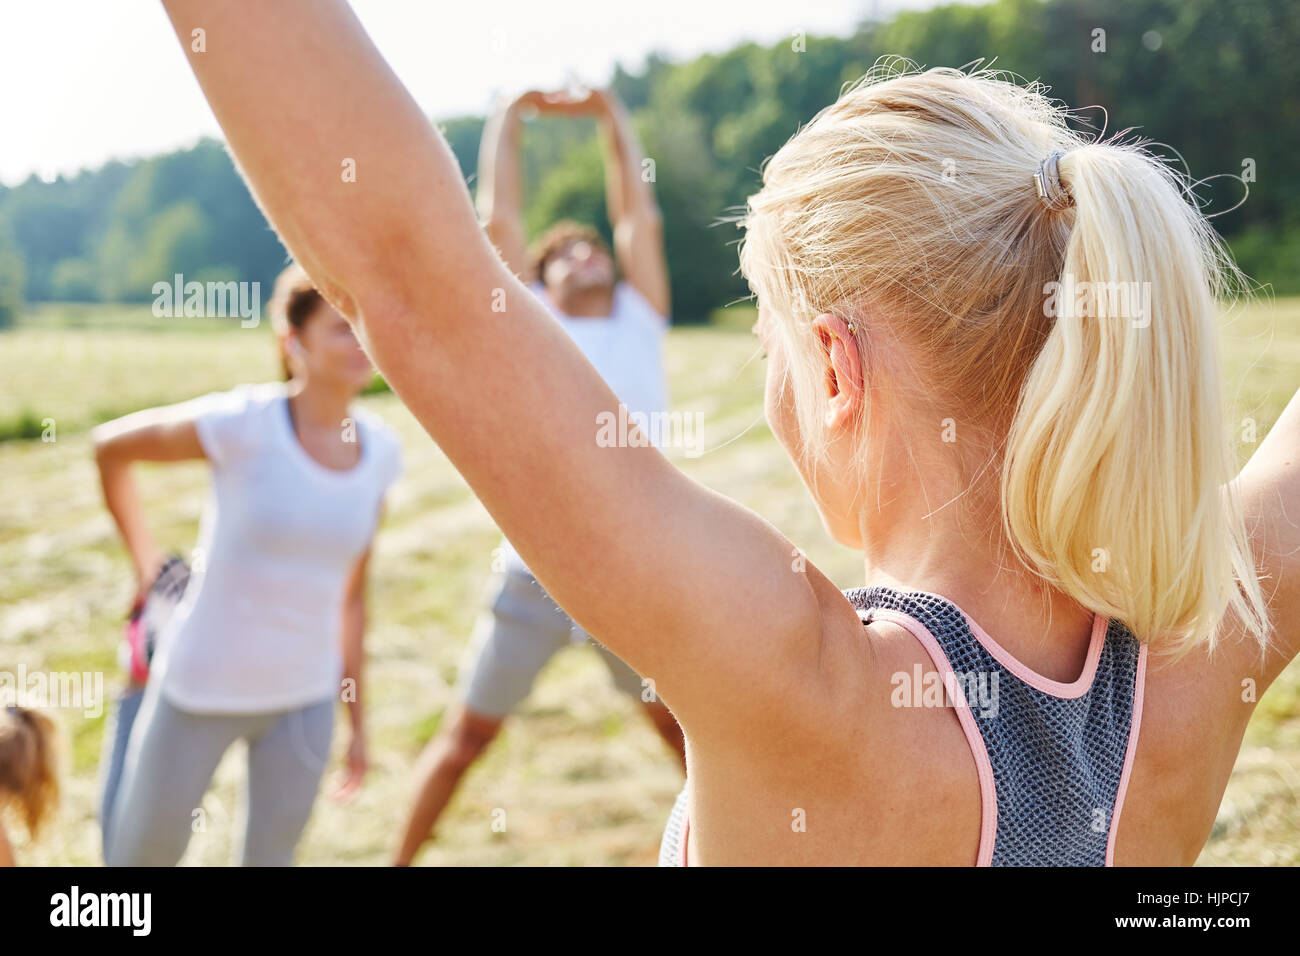 Young people stretching in health class making sport Stock Photo